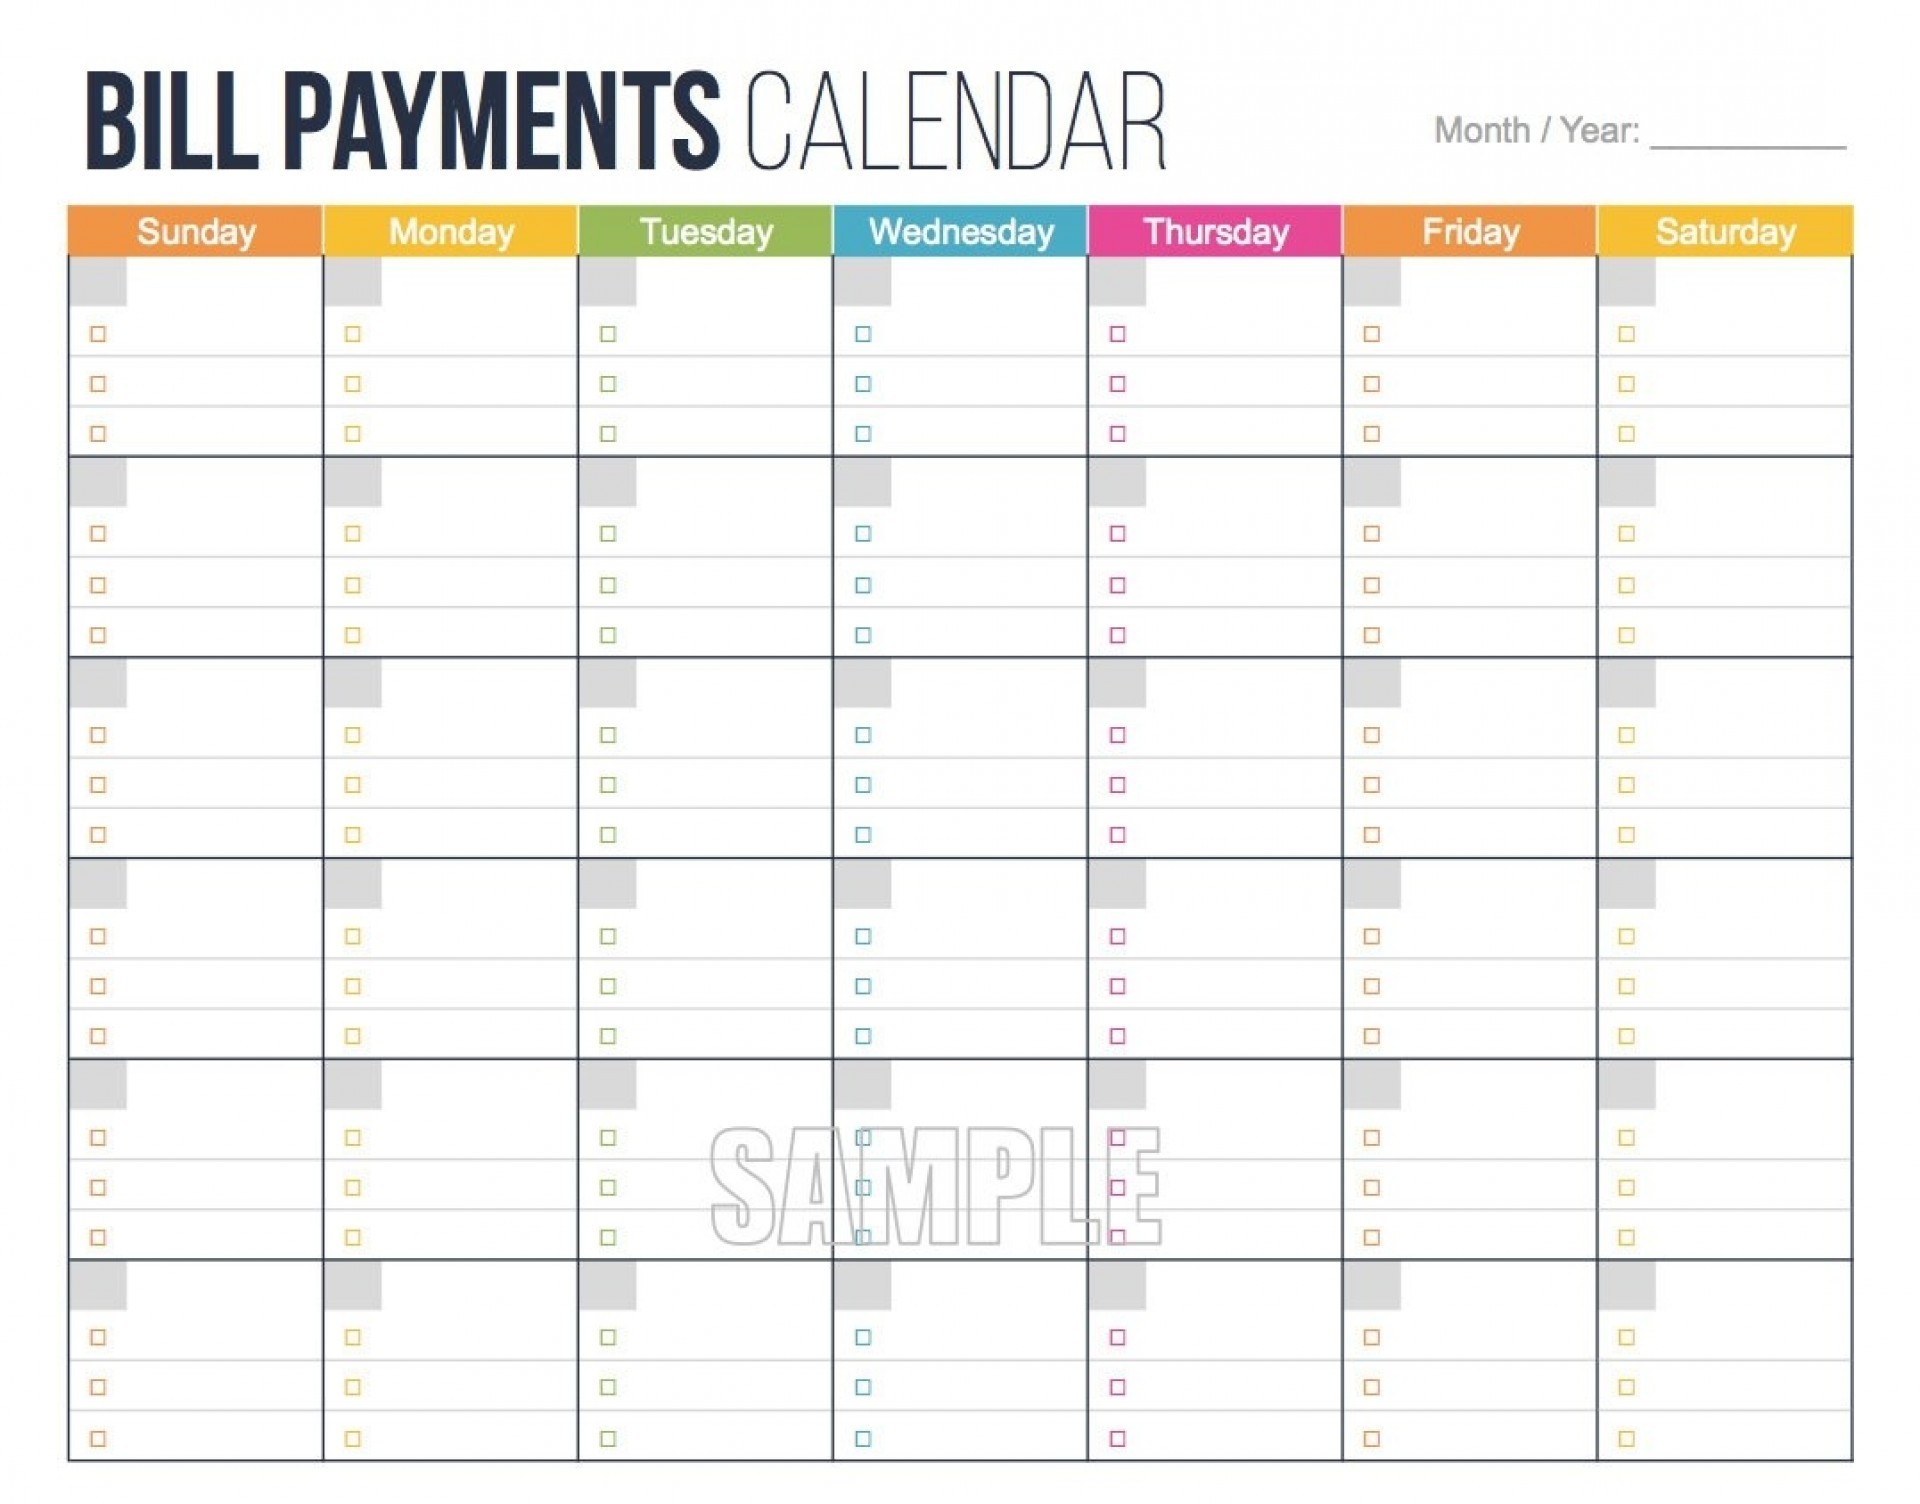 009 Bill Pay Calendar Template Ideas Paying Free Printable-Monthly Bill Calendar Free Download